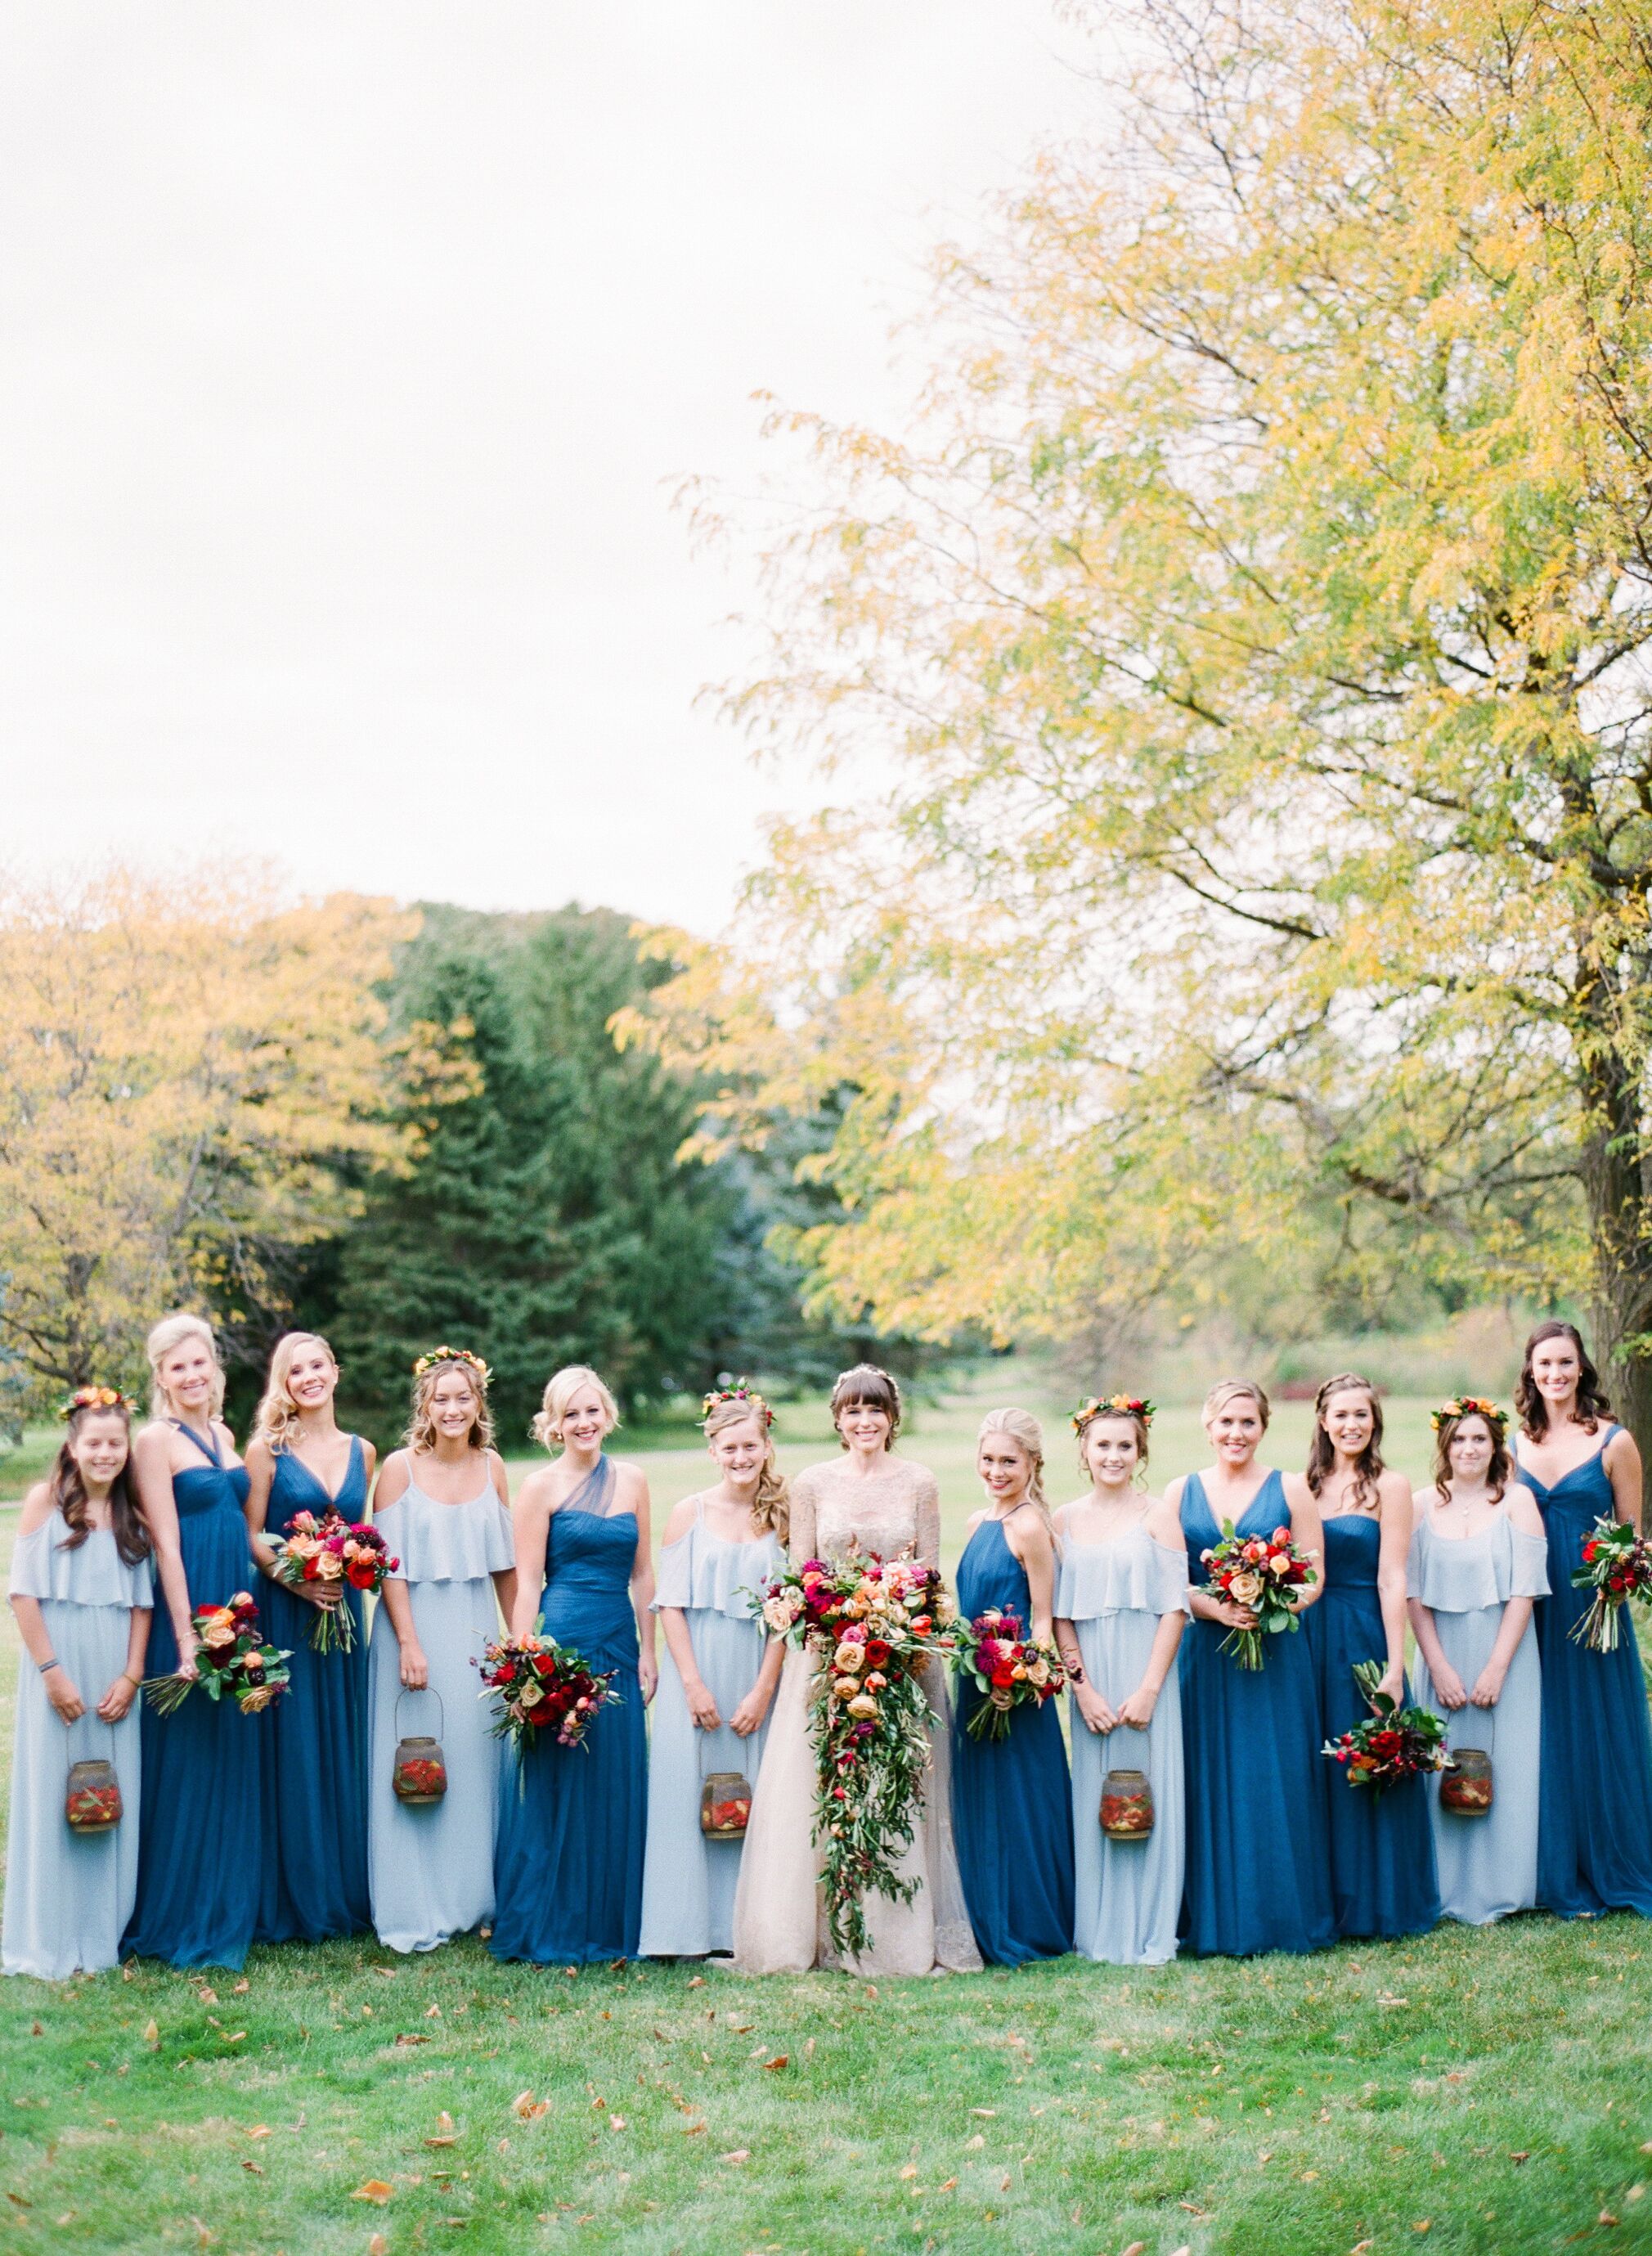 shades of blue for bridesmaid dresses